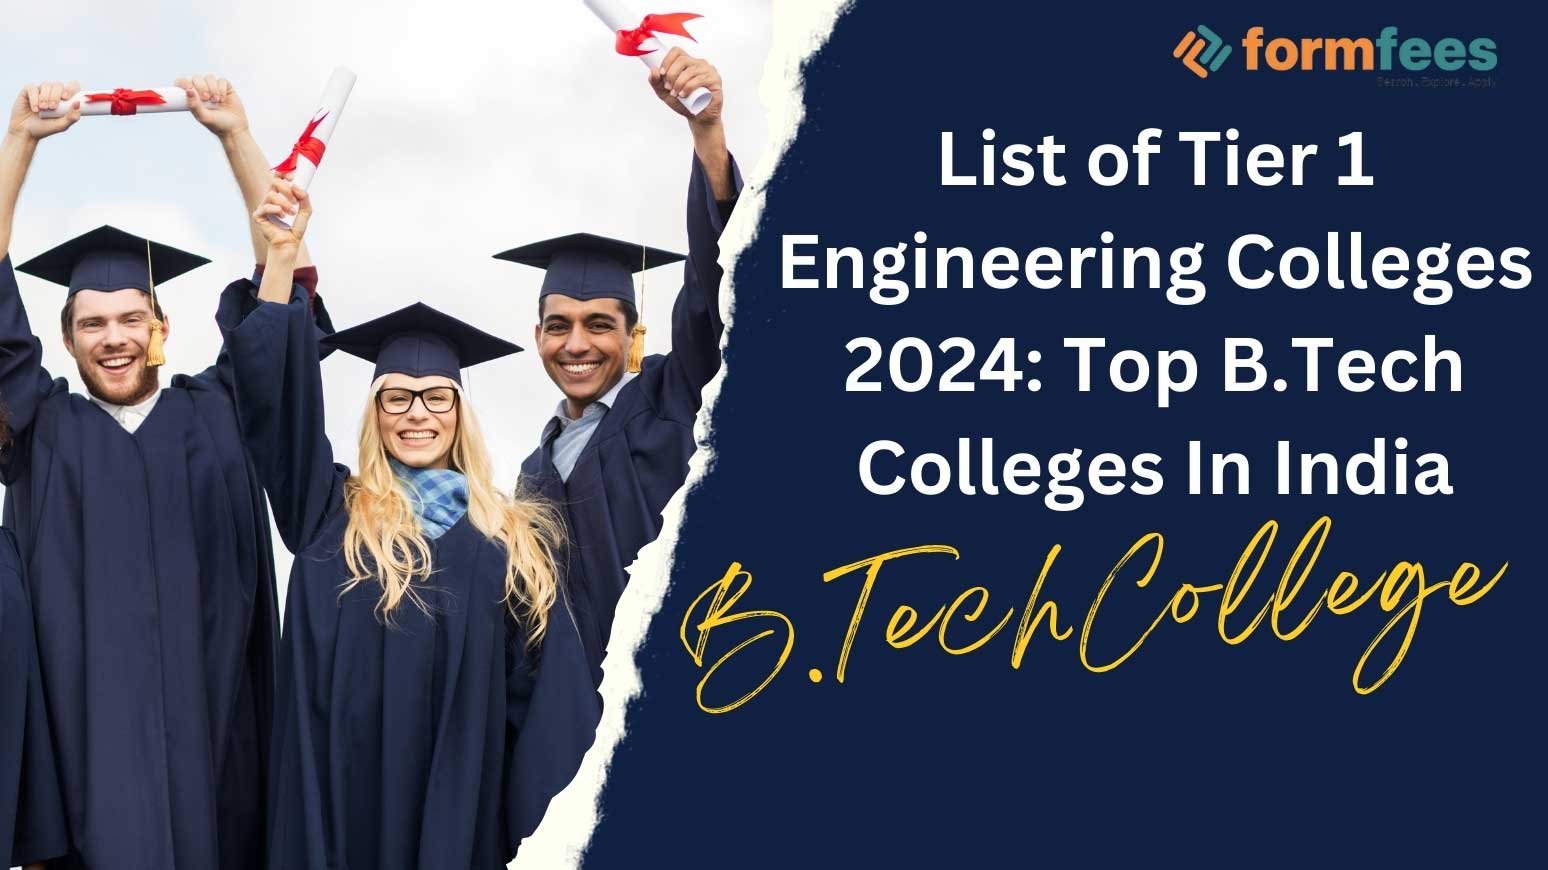 List of Tier 1 Engineering Colleges 2024 Top B.Tech Colleges In India